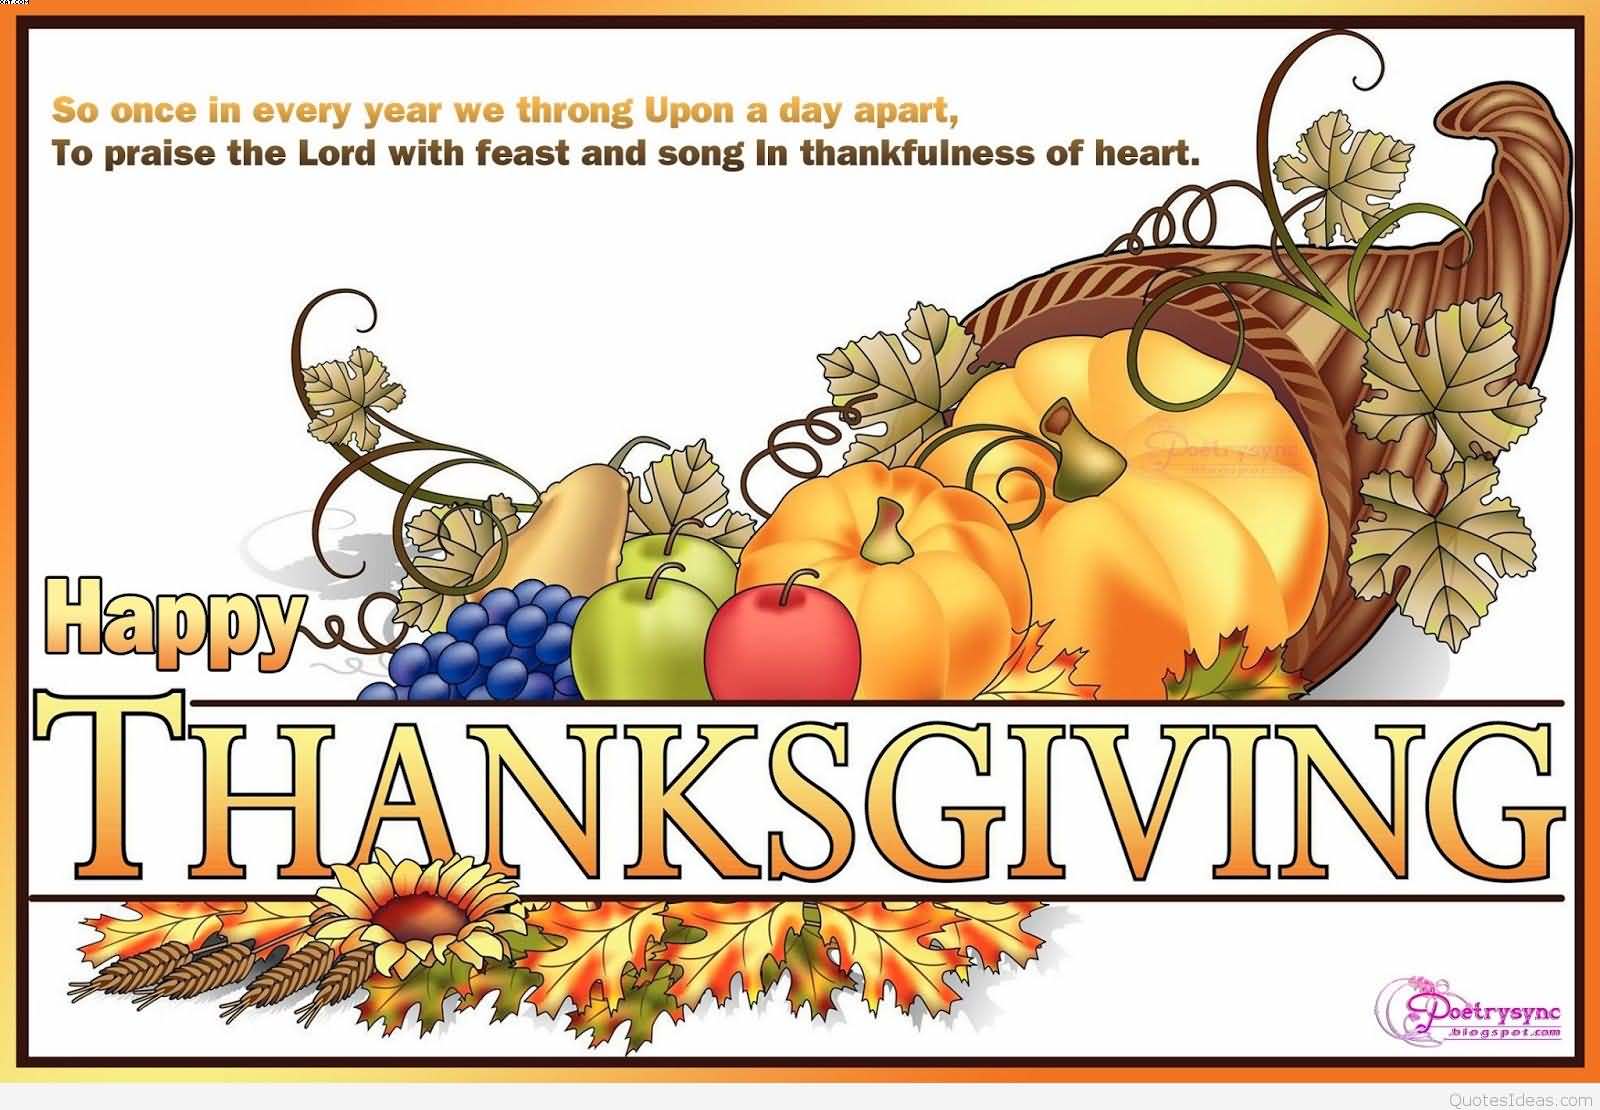 Beautiful Happy Thanksgiving wishes card wallpaper